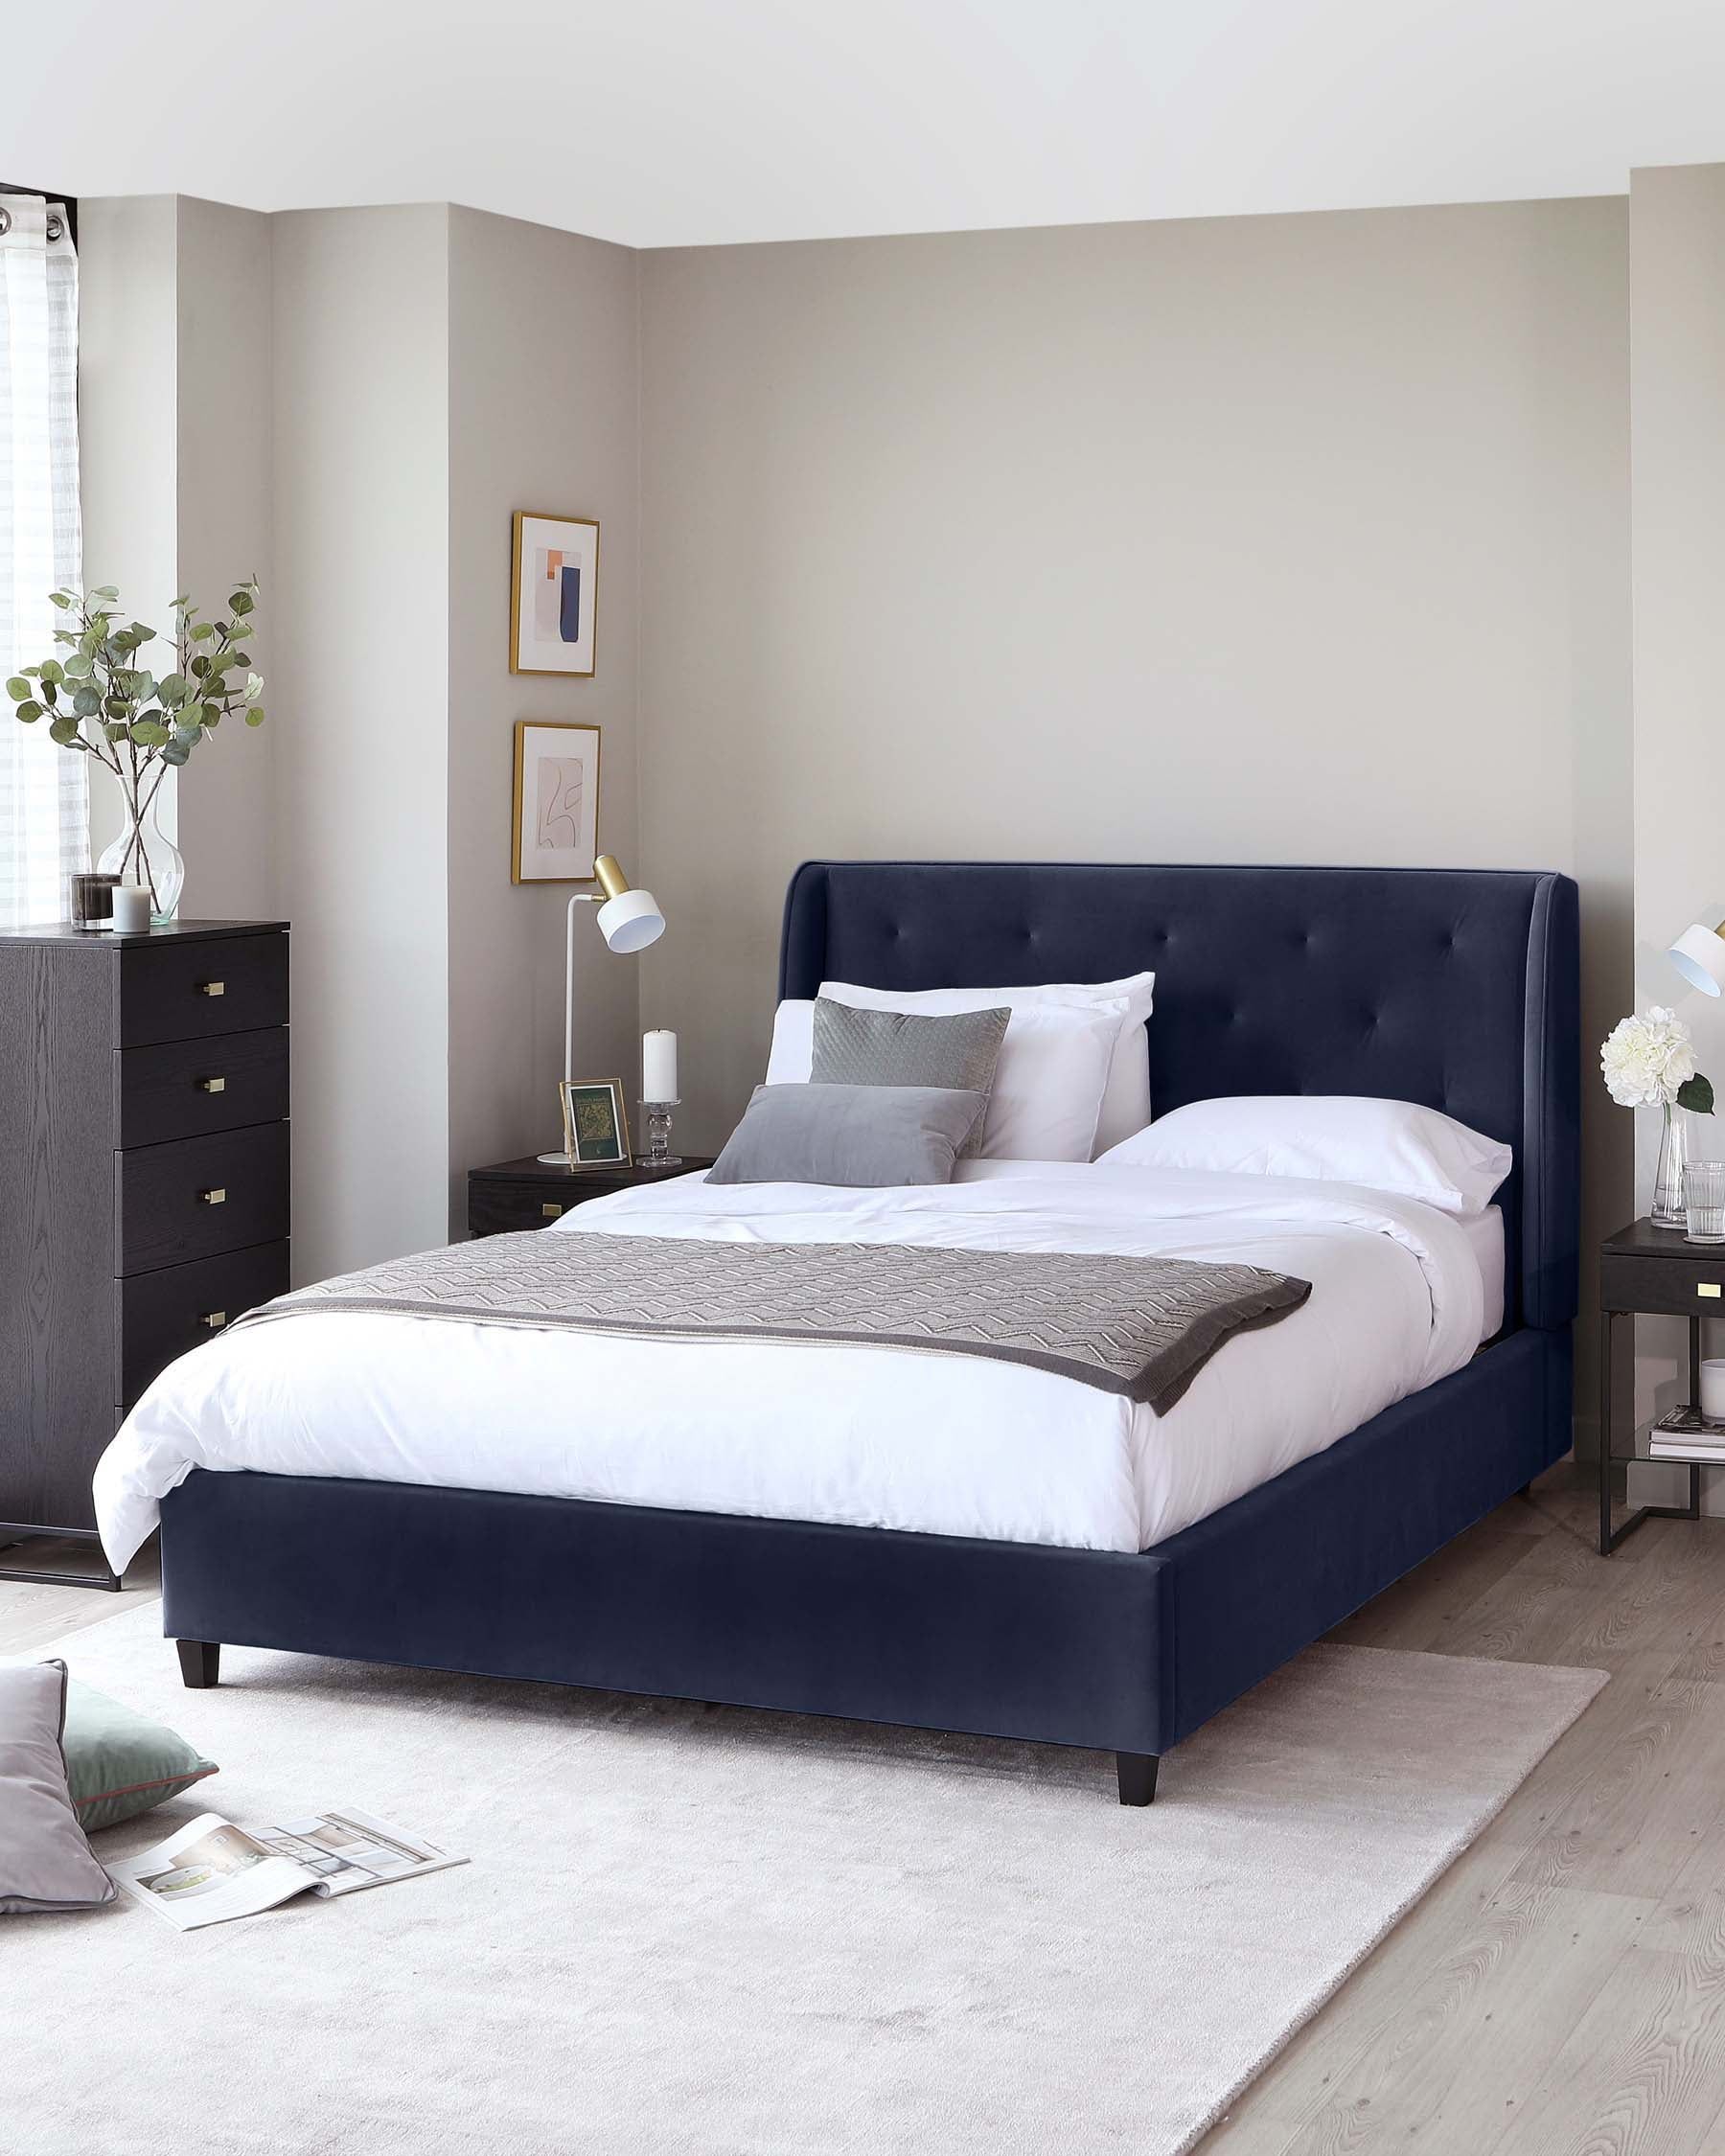 King Size Bed With Storage : Why King Size Bed With Storage is a Game-Changer in Small Spaces